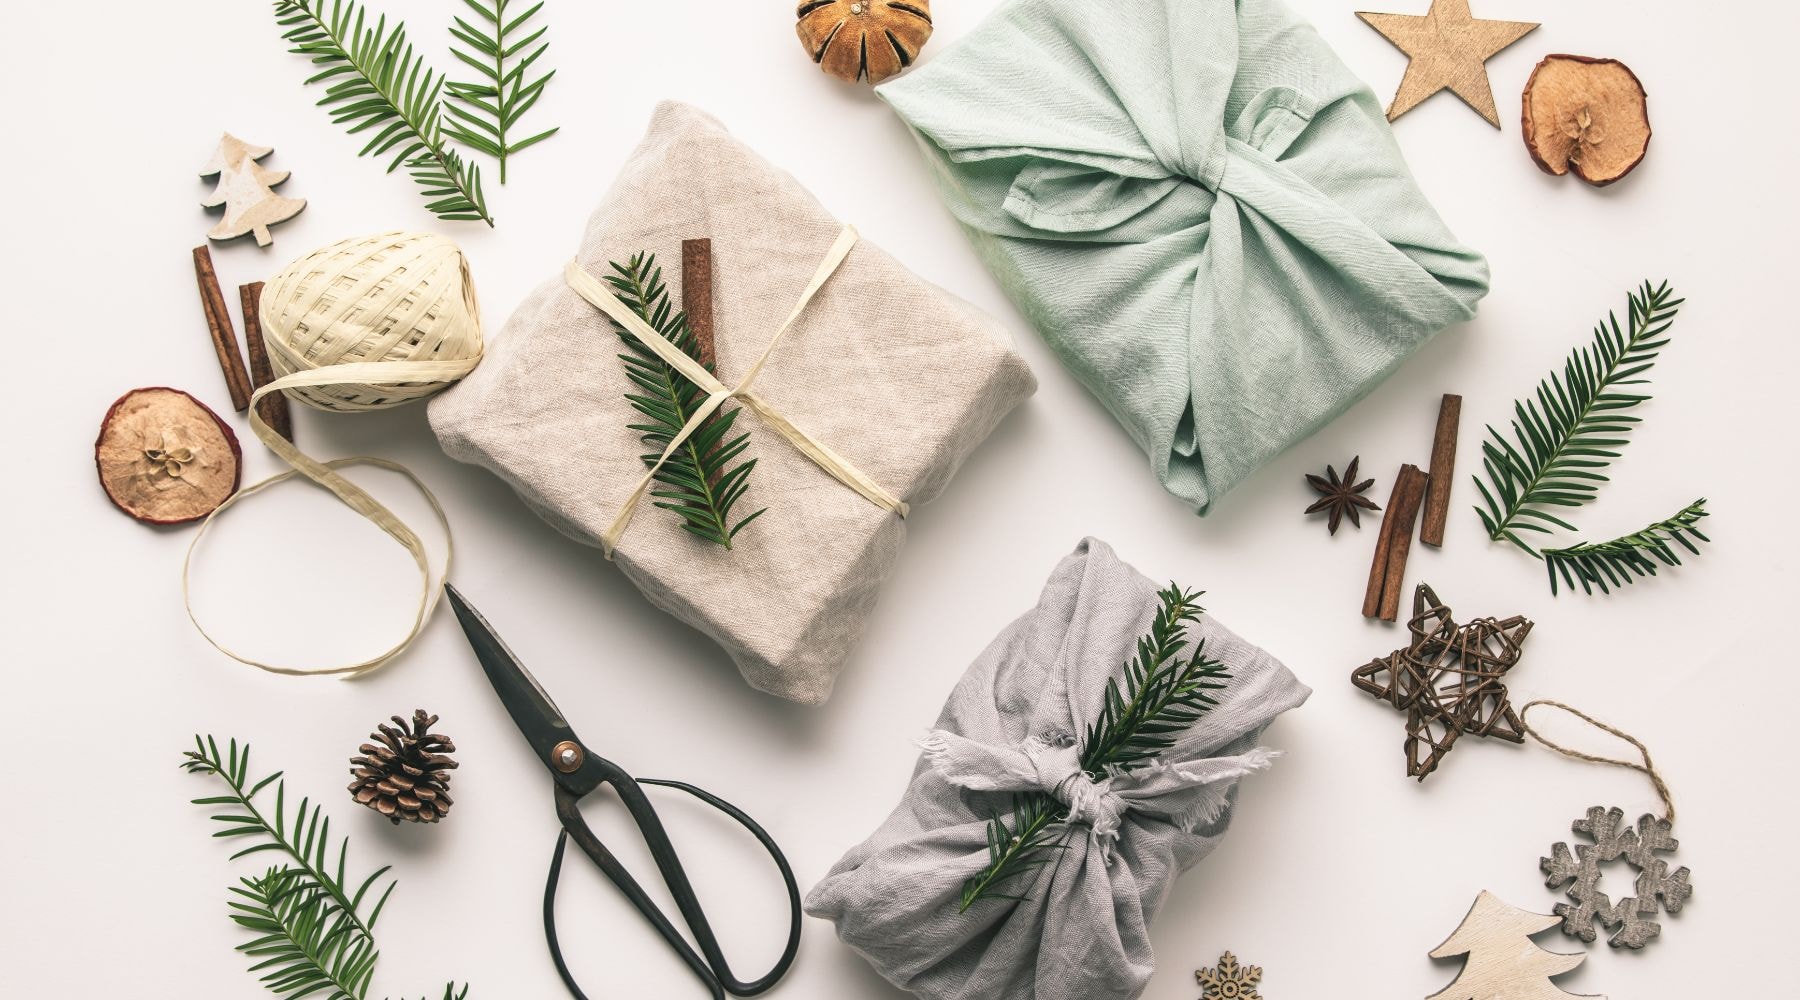 Flat lay of eco-friendly gift wrapping materials including dried orange slices, pine cones, and recycled paper.